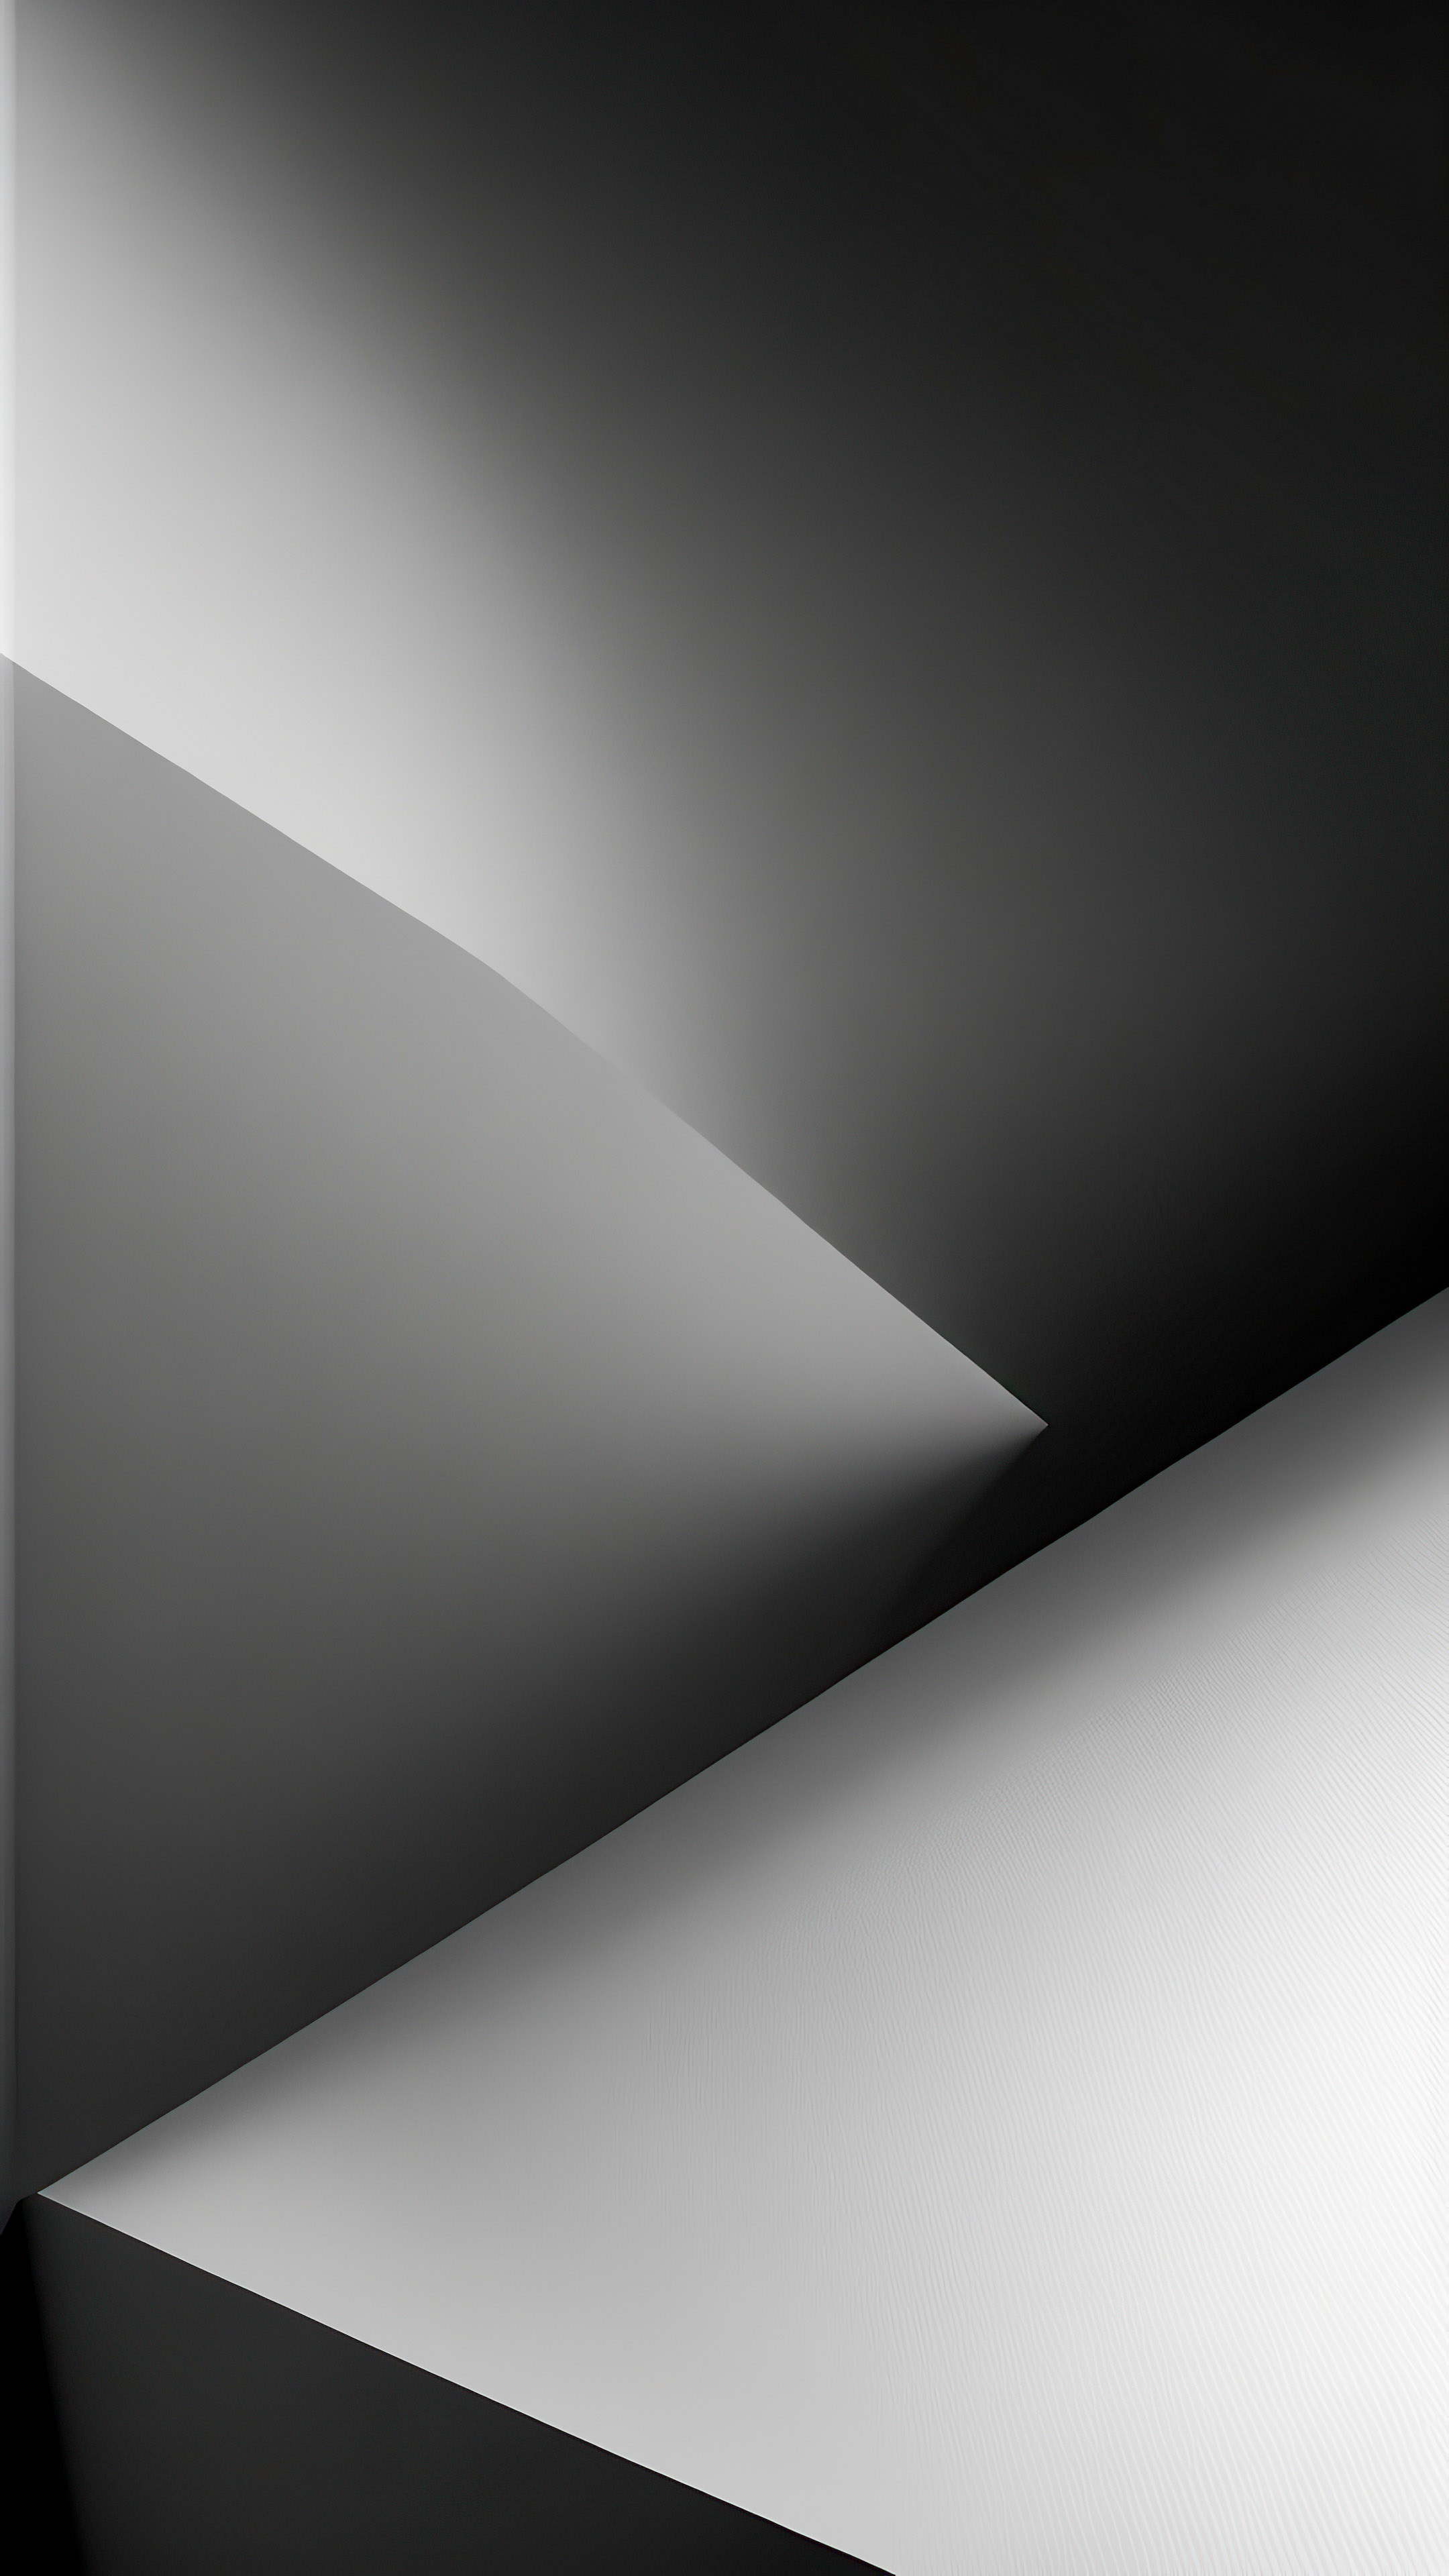 Dive into the interplay of light and shadow with our dark abstract iPhone wallpaper.